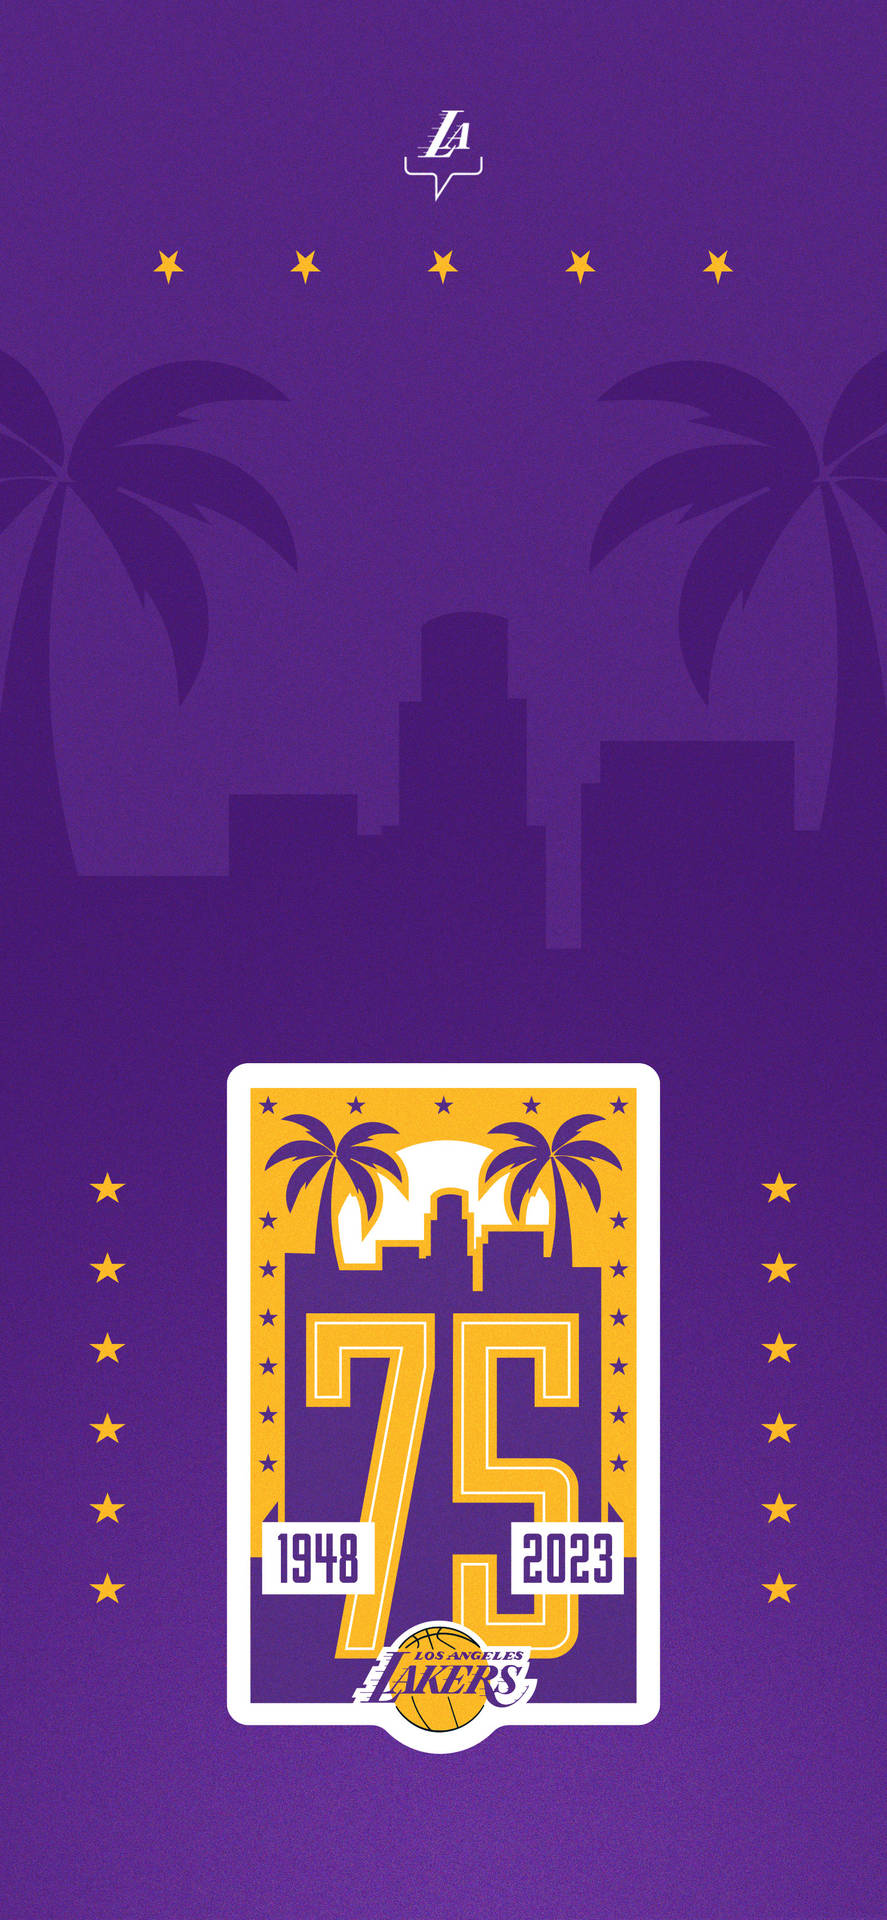 Los Angeles Lakers 75 Years Mobile Wallpaper